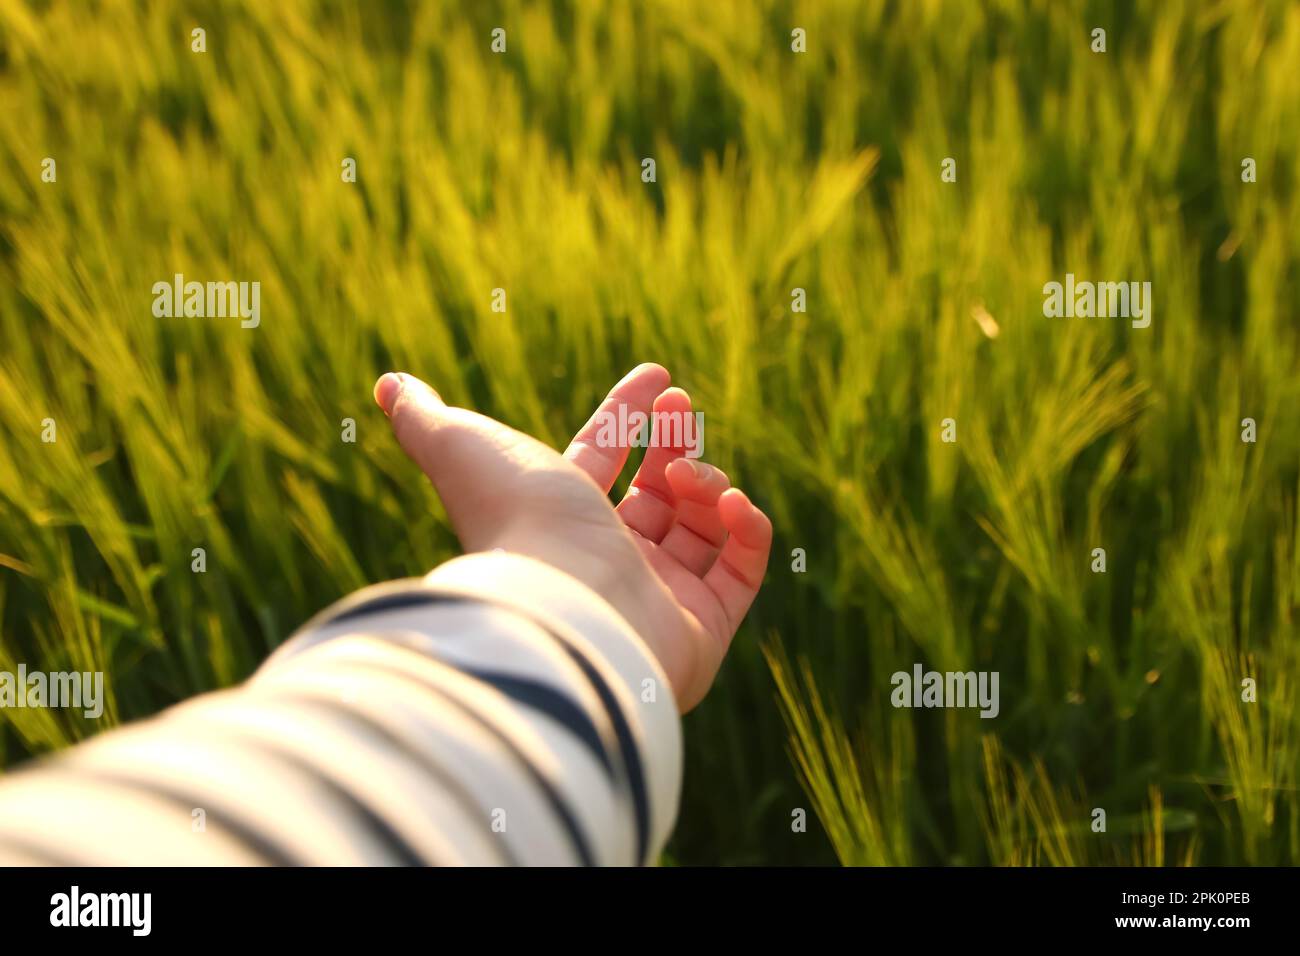 Female hand against grass. Girl runs her hand over the tall grass and touches. Walking in the fields in the sunset light. Work and life balance concep Stock Photo